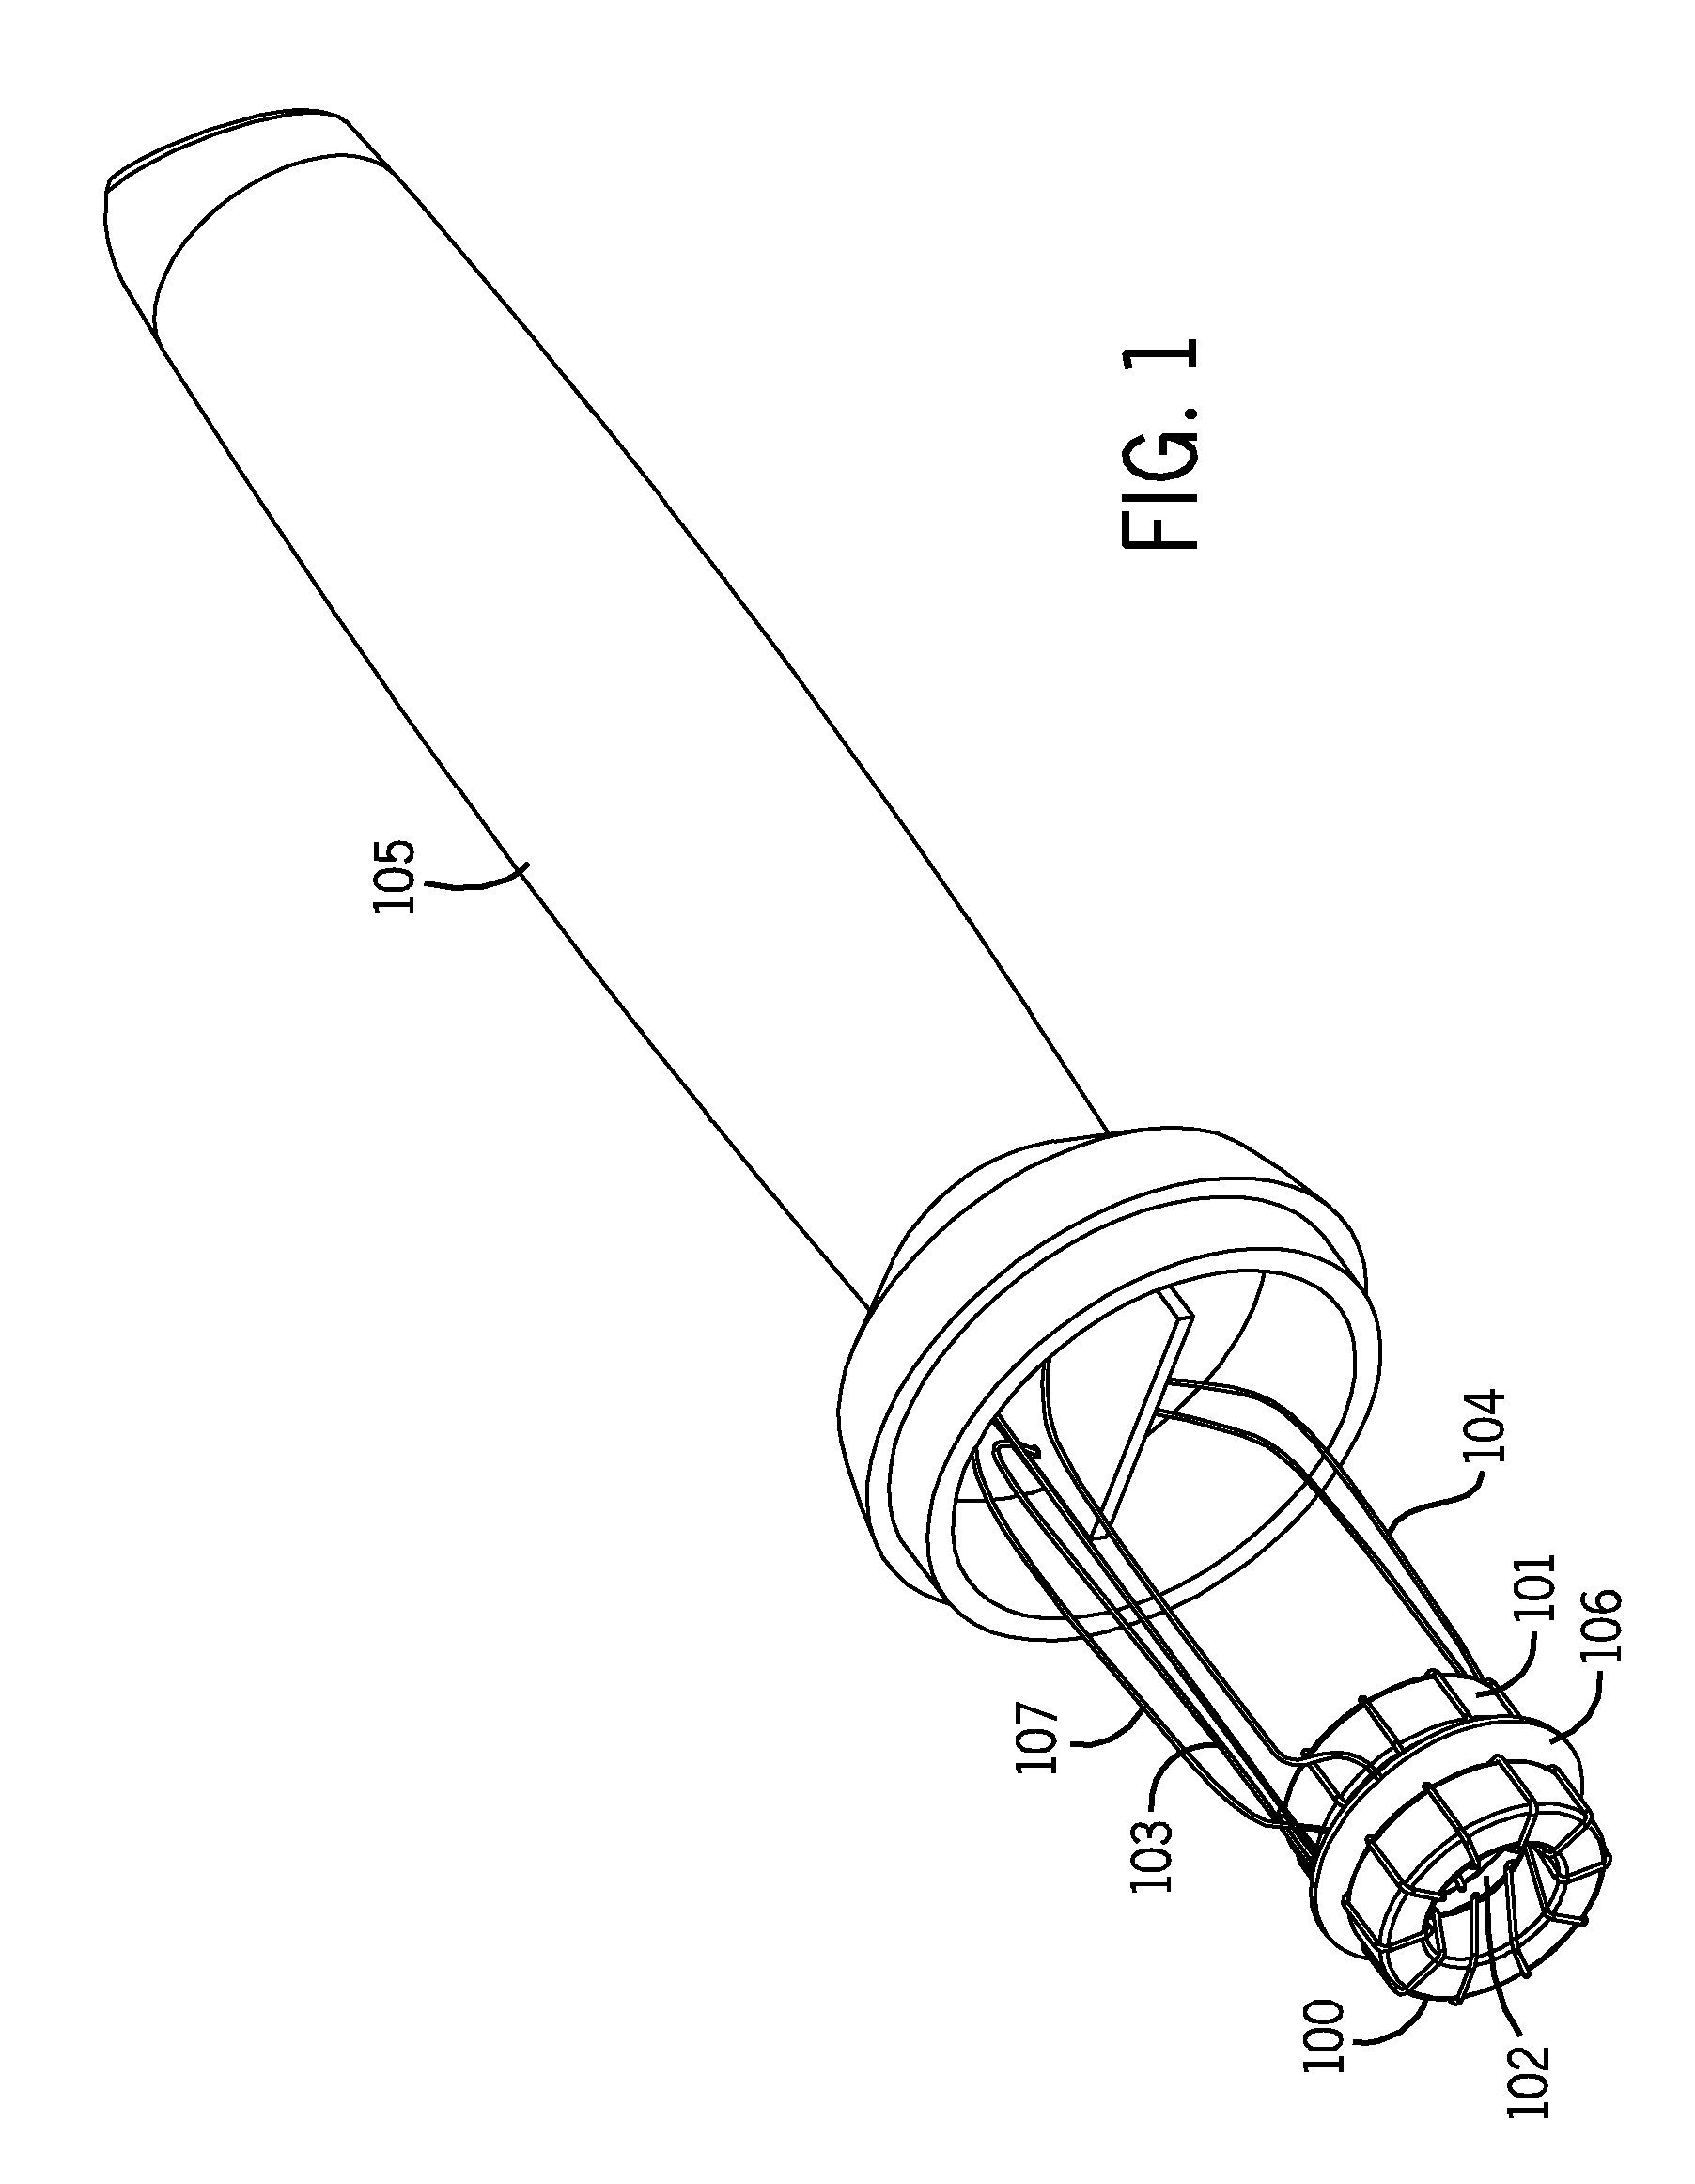 Toroidal conductivity probe with integrated circuitry